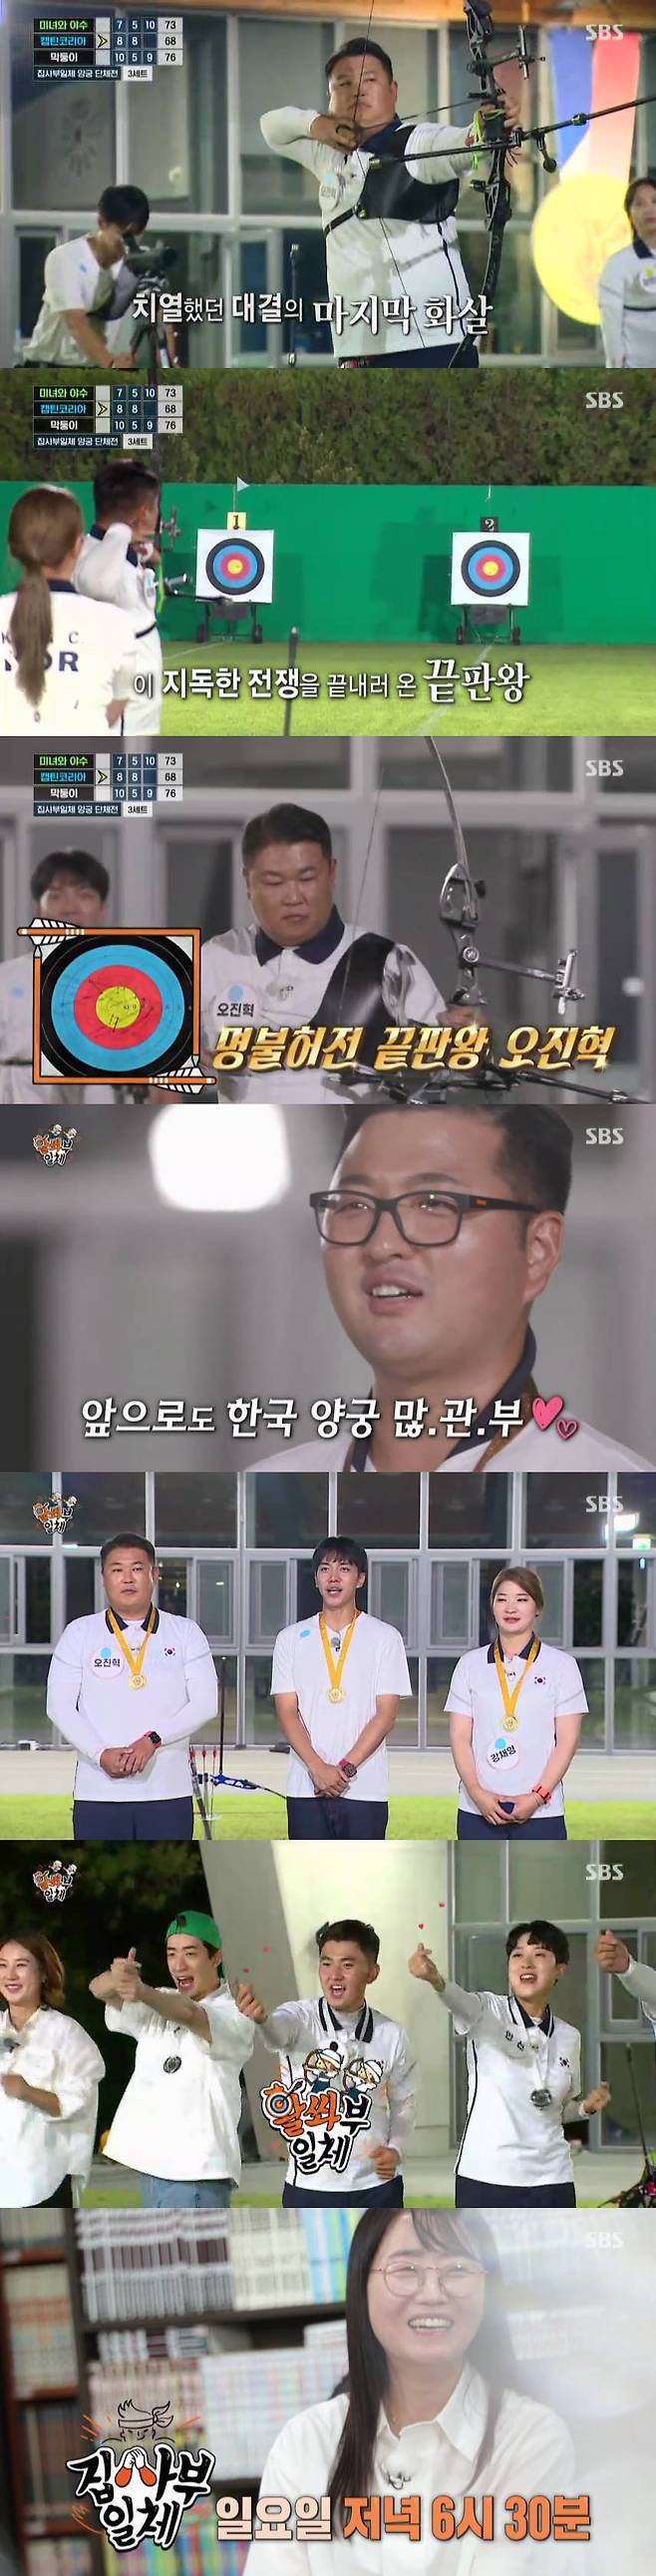 The archery national team played a tense confrontation as the Olympics in All The Butlers. On the 29th, SBS entertainment program All The Butlers appeared in the archery national team Oh Jin-Hyek, Kim Woo-jin, Kim je-deok, Anshan, Kang Chae-young and Kang Min-hee, He fought.On this day, Oh Jin-Hyek surprised the members by saying, I shot this thing. He said, I put the ring on the thread with the event Kyonggi and shot the arrow in the ring while moving from side to side.I was hit by one shot, I calculated that this would be the right timing, he added.The six masters were divided into OB team Oh Jin-Hyek, Kim Woo-jin, Kang Chae-young, YB team Anshan, Kang Min-hee and Kim je-deok to challenge the bell tomatoes.Kim Woo-jin and Kang Chae-youngs arrows hit the cherry tomatoes, while Kim je-deok and his eldest brother Oh Jin-Hyek were surprised by the Guan Tong.In addition, Oh Jin-Hyek was cheered by perfectly matching moving tomatoes at once.Since then, the master and members have been divided into three teams and have started a group exhibition with a gold badge.The youngest line Anshan, Kim je-deok and Yoo Soo-bin are the smiling team, Oh Jin-Hyek, Kang Chae-young and Lee Seung-gi are the Captain America: Civil War Korea team, Kim Woo-jin, Kang Min-hee and Yang Se-hyeong are the  The Beauty and the Beast team united.Prior to the showdown, Anshan released a routine card that read: Central, aim, 1 second bath!; Anshan said: Im a bit concise.Its about holding the center, aiming, and banging in a second, he added. Just seeing the writing helps a lot.Kim je-deok also showed his routine card and emphasized protecting his left arm. He said, When he shoots his bow and his left arm goes down, the arrow goes to the wrong place.You have to protect your arms until the arrow hits the target. When the full-scale confrontation began, the masters showed off their perfect skills like Kyonggi, and the members also attracted attention with their unexpected activities.The three teams, who showed their ability in the last minute, tied the game in the first set and added tension.The second set results showed that Captain America: Civil War Korea and Beast teams scored 52 points and Beauty and the Beast team continued their tight battle with 51 points.The last three sets, the Beauty and the Beast team Kang Min-hee and Yang Se-hyeong, were left with seven and five points, respectively, while Captain America: Civil War Korea Lee Seung-gi scored eight and Bobbie team Yoo Soo-bin scored five. The Ar Korea team has taken the lead.With only one shot left, Beauty and the Beast Kim Woo-jin scored 10 points and Bobbie Anshan shot 9 points, but Oh Jin-Hyek shot 9 points and the Captain America: Civil War Korea team won the championship.The three teams fierce battle added to the fun of watching, while the moment when Oh Jin-Hyek, the end of the day, aimed at the last arrow, focused on the attention of the viewers and recorded a best one minute with a rating of 9.7% per minute (based on the Nielsen Korea metropolitan area).After Kyonggi ended, the masters said, I think the archery is more known as Im shooting All The Butlers.I would like to say thank you for representing the Korean archery, and I would like to ask for your interest and love in the future. 